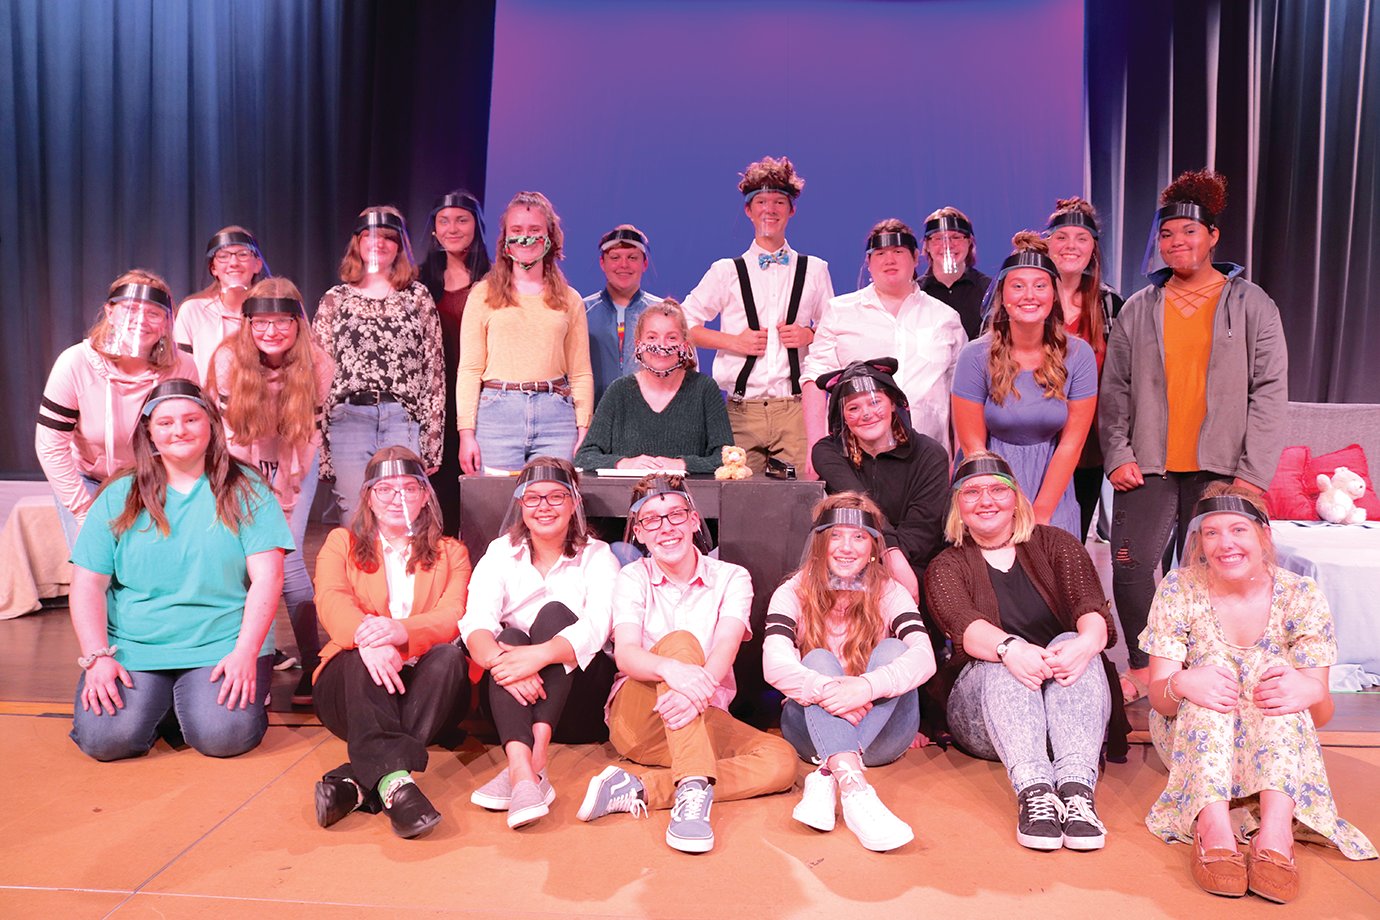 The NMHS Theatre Troupe is in costume and ready for a final rehearsal Thursday afternoon. Cast members pictured, in no particular order, include Alecsandra Baldwin, Emerson Boaz, Cassie Bone, Jackie Carlisle, Miranda Crowe, Jordan Crull, Joy Davis, Lily Dockins, Aavree Doughty, Sam Douma, Rylan Dowell, Abi Eutsler, Haley Evans, Harmon Hann, Shelby Kammerer, Rylie Koopman, Sophie Morris, Liberty Owens, Ali Roche, Katherine Stafford, Kyla Turnbloom, Cameron Tyo, Natalie Walker, Kendall Williamson, Teegan Bacon, Claire Bonwell, Ben Eldridge, Zack Hall, Meagon Lyon, Lilly McKinniss and Bryce Sommer. The play, titled "The Internet is Dist -- OH LOOK A KITTEN" premiers tonight and runs through Sunday.